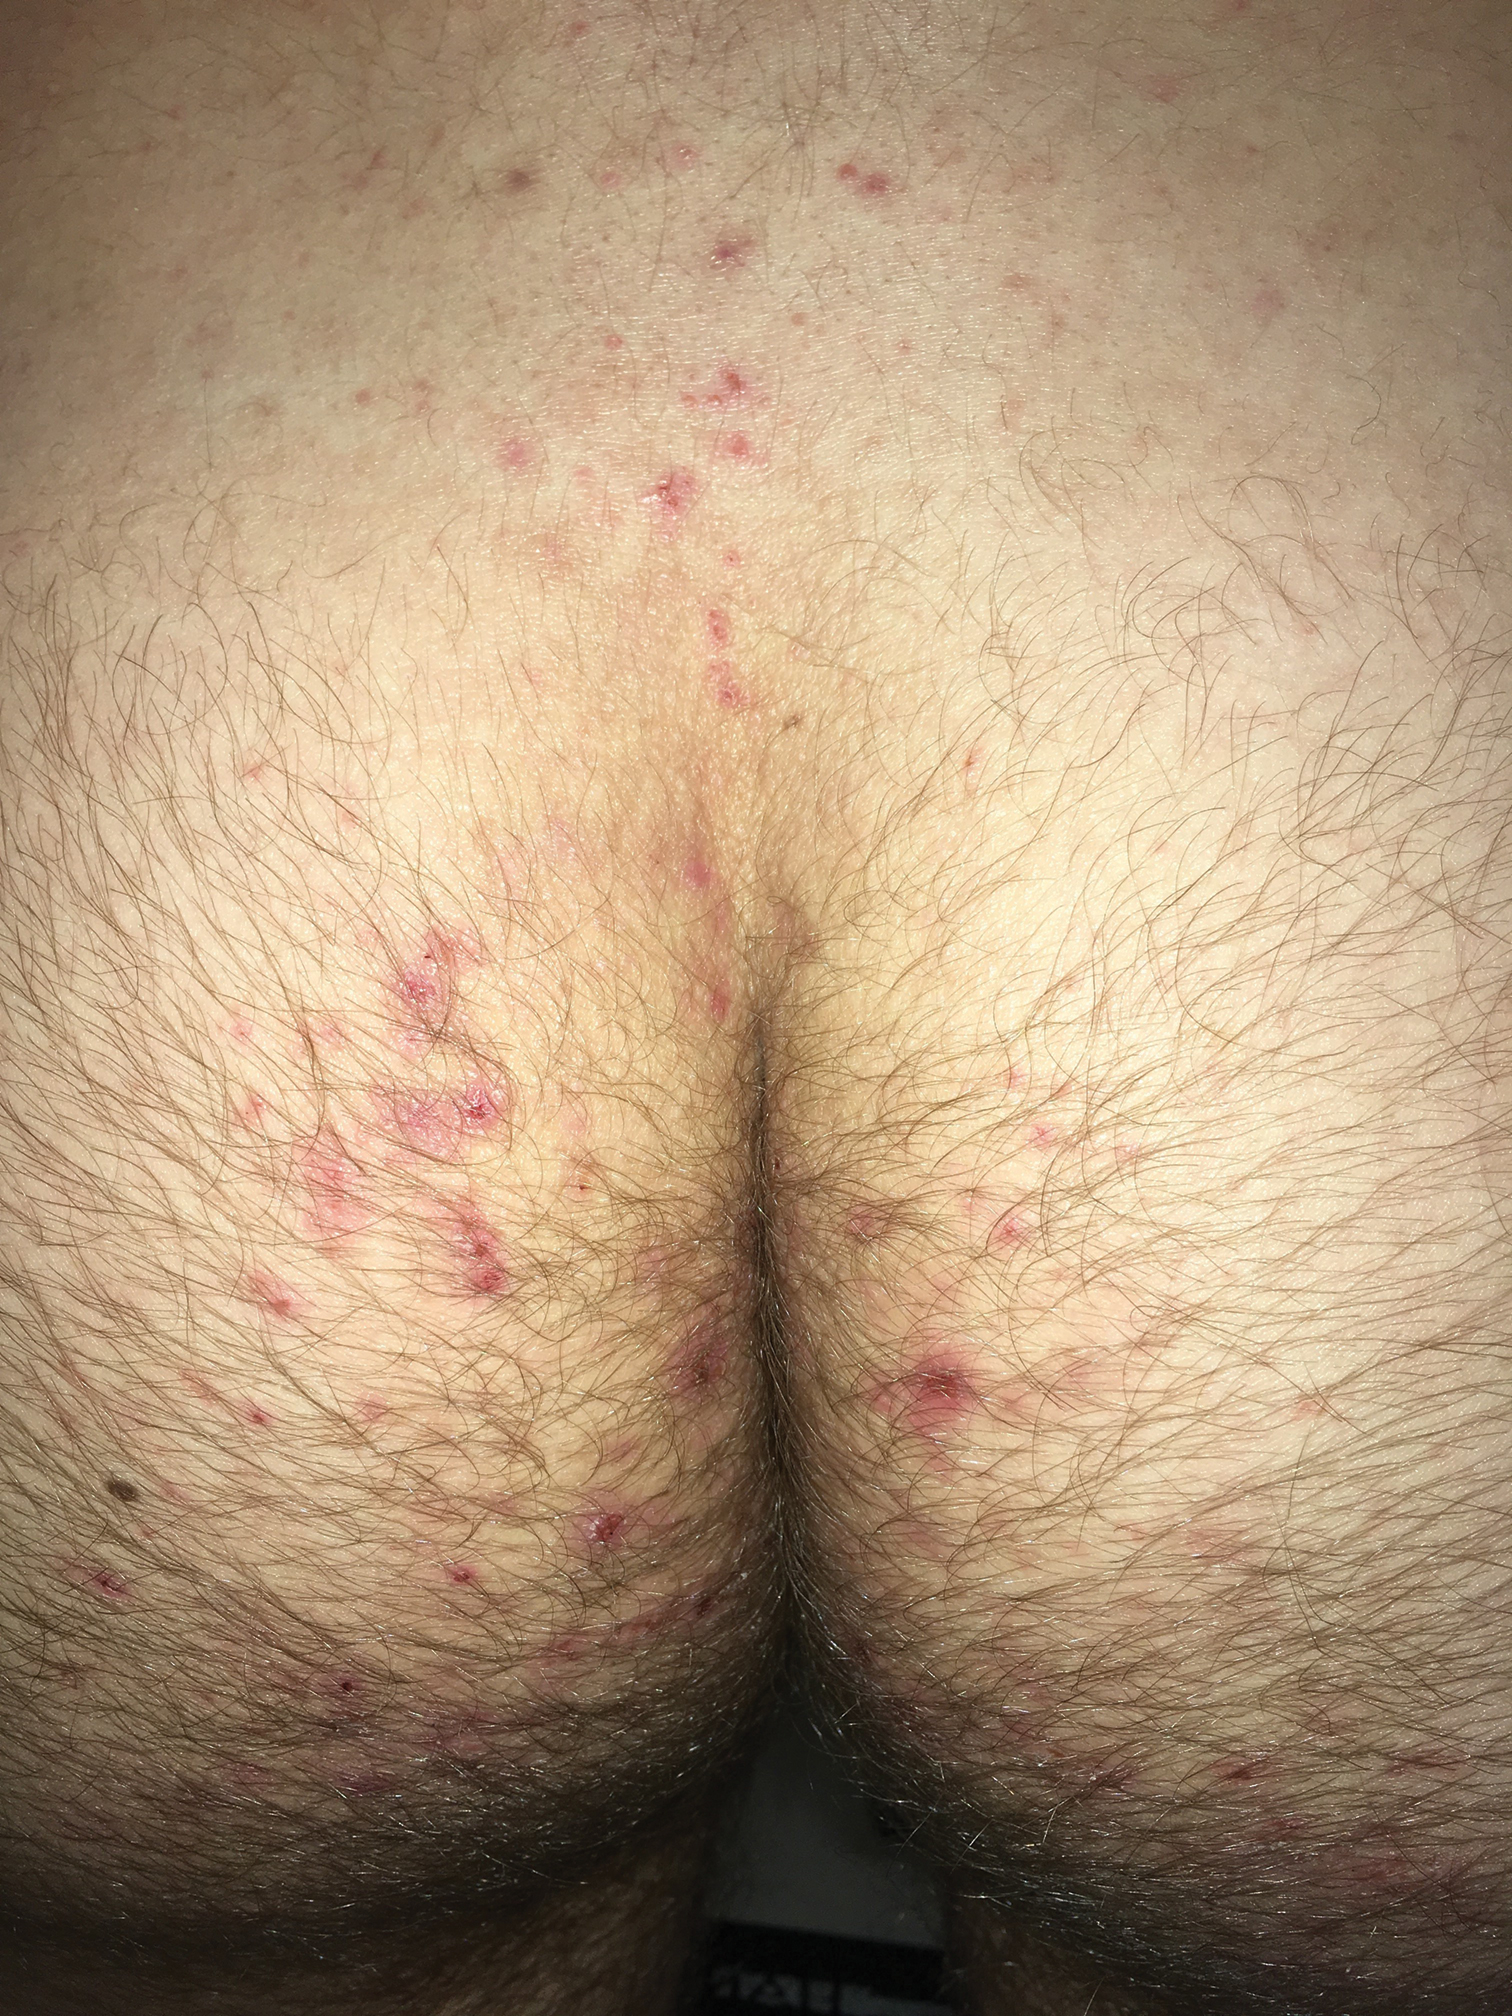 Butt rashes in adults: Causes, treatment, and more